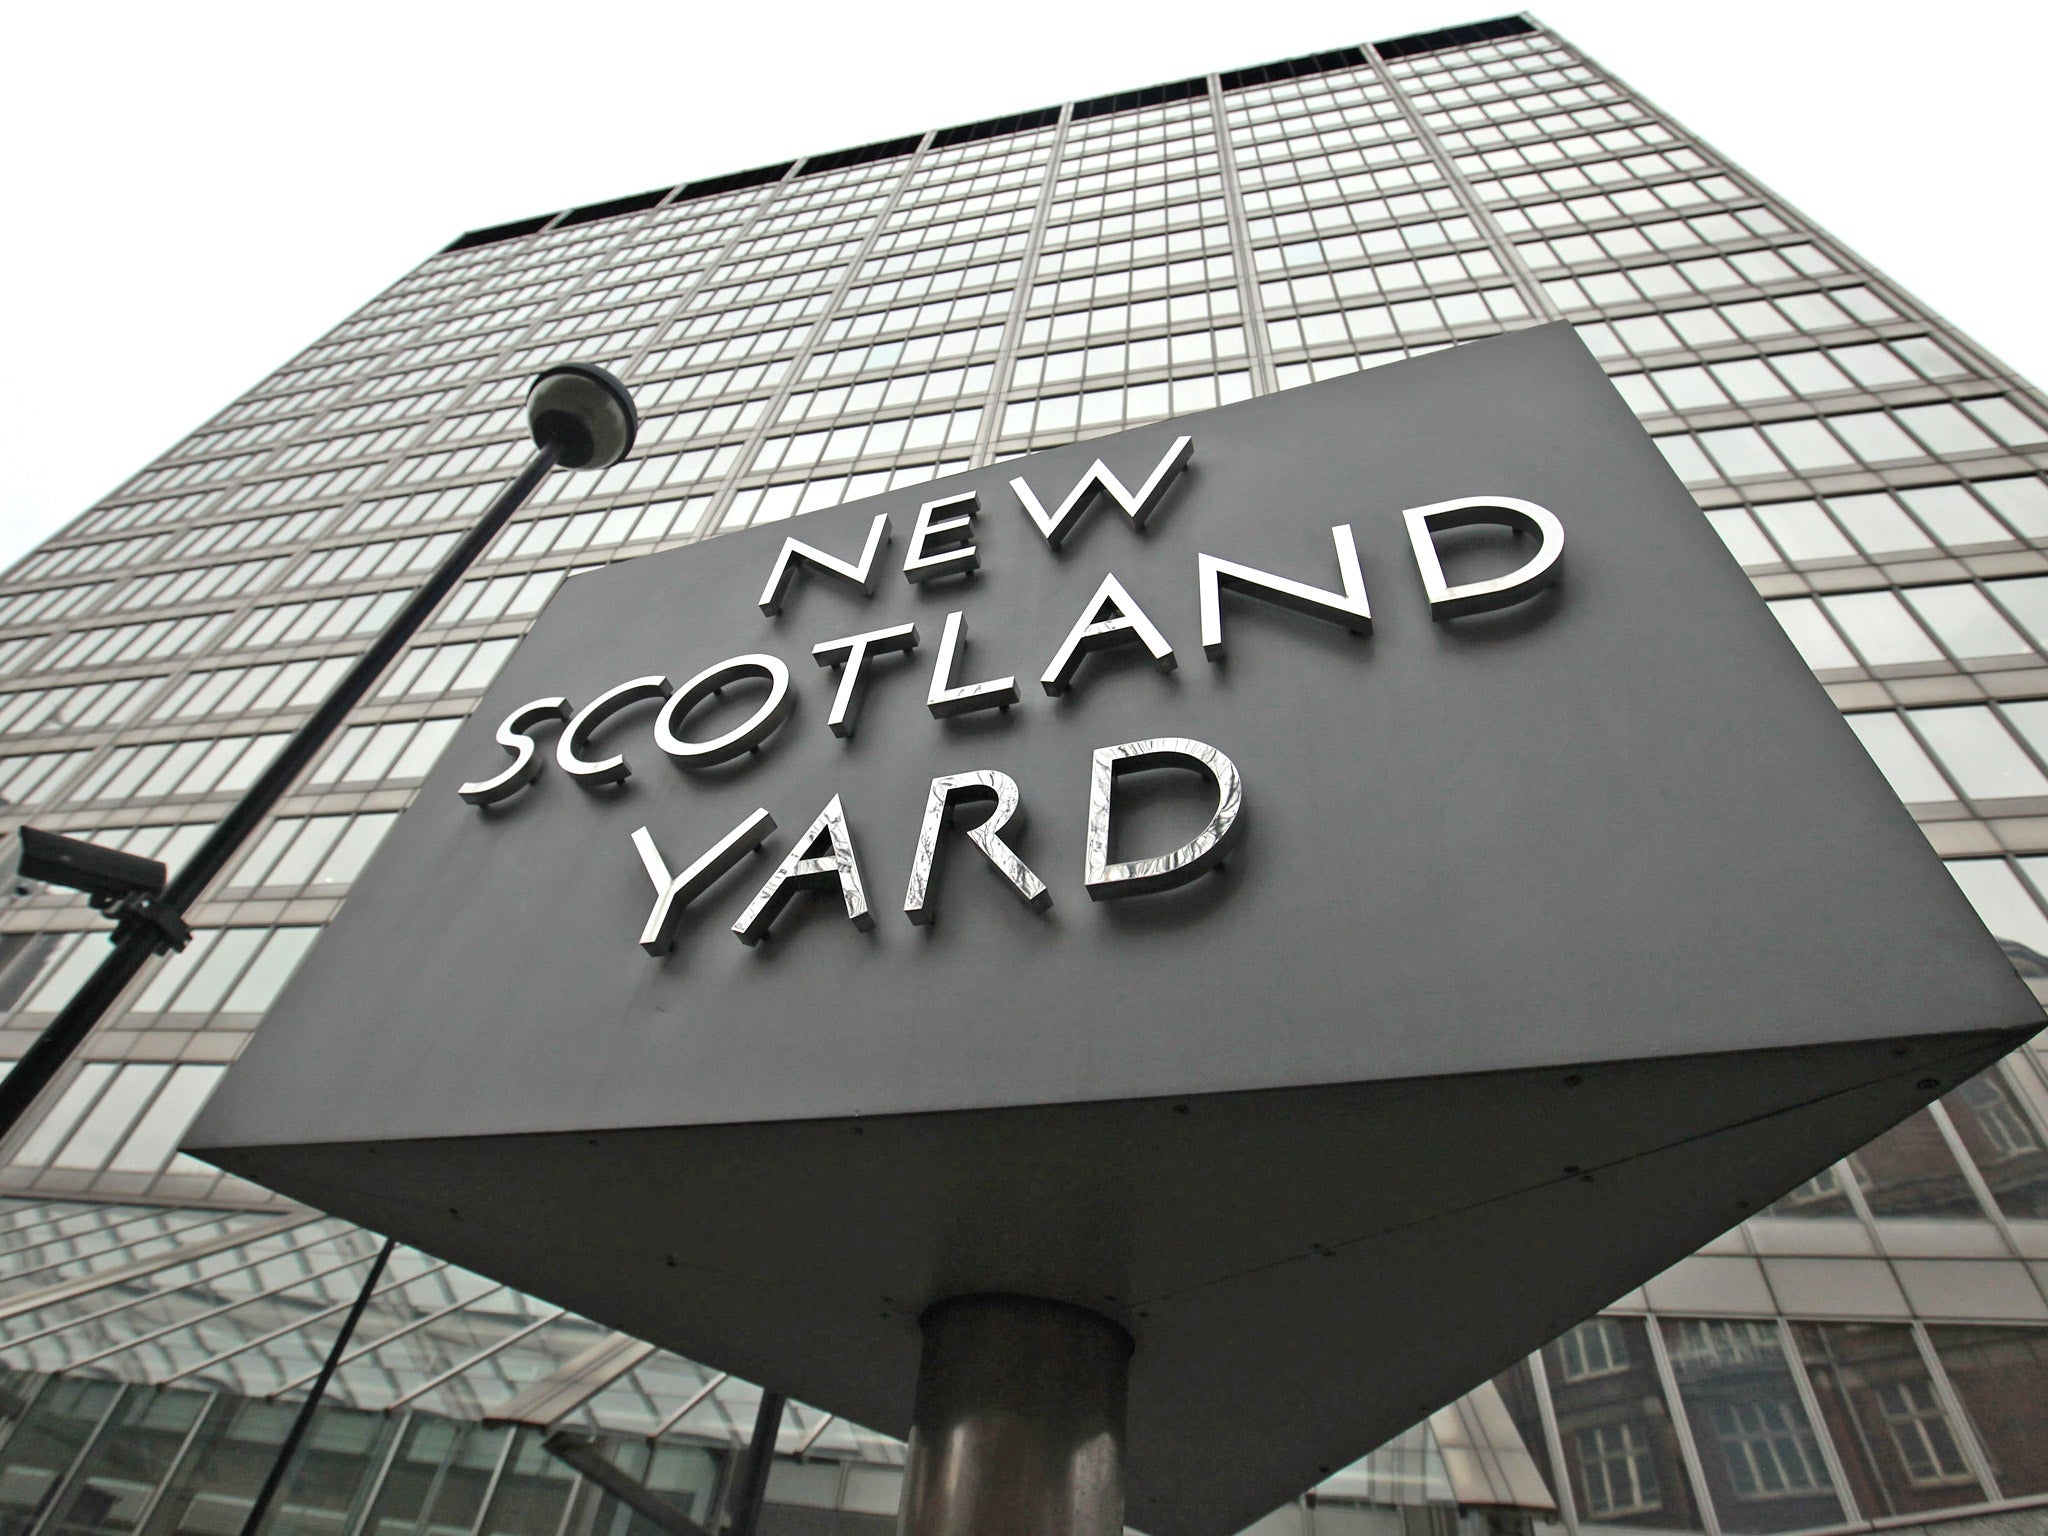 Scotland Yard said the incident has been referred to the IPCC for consideration